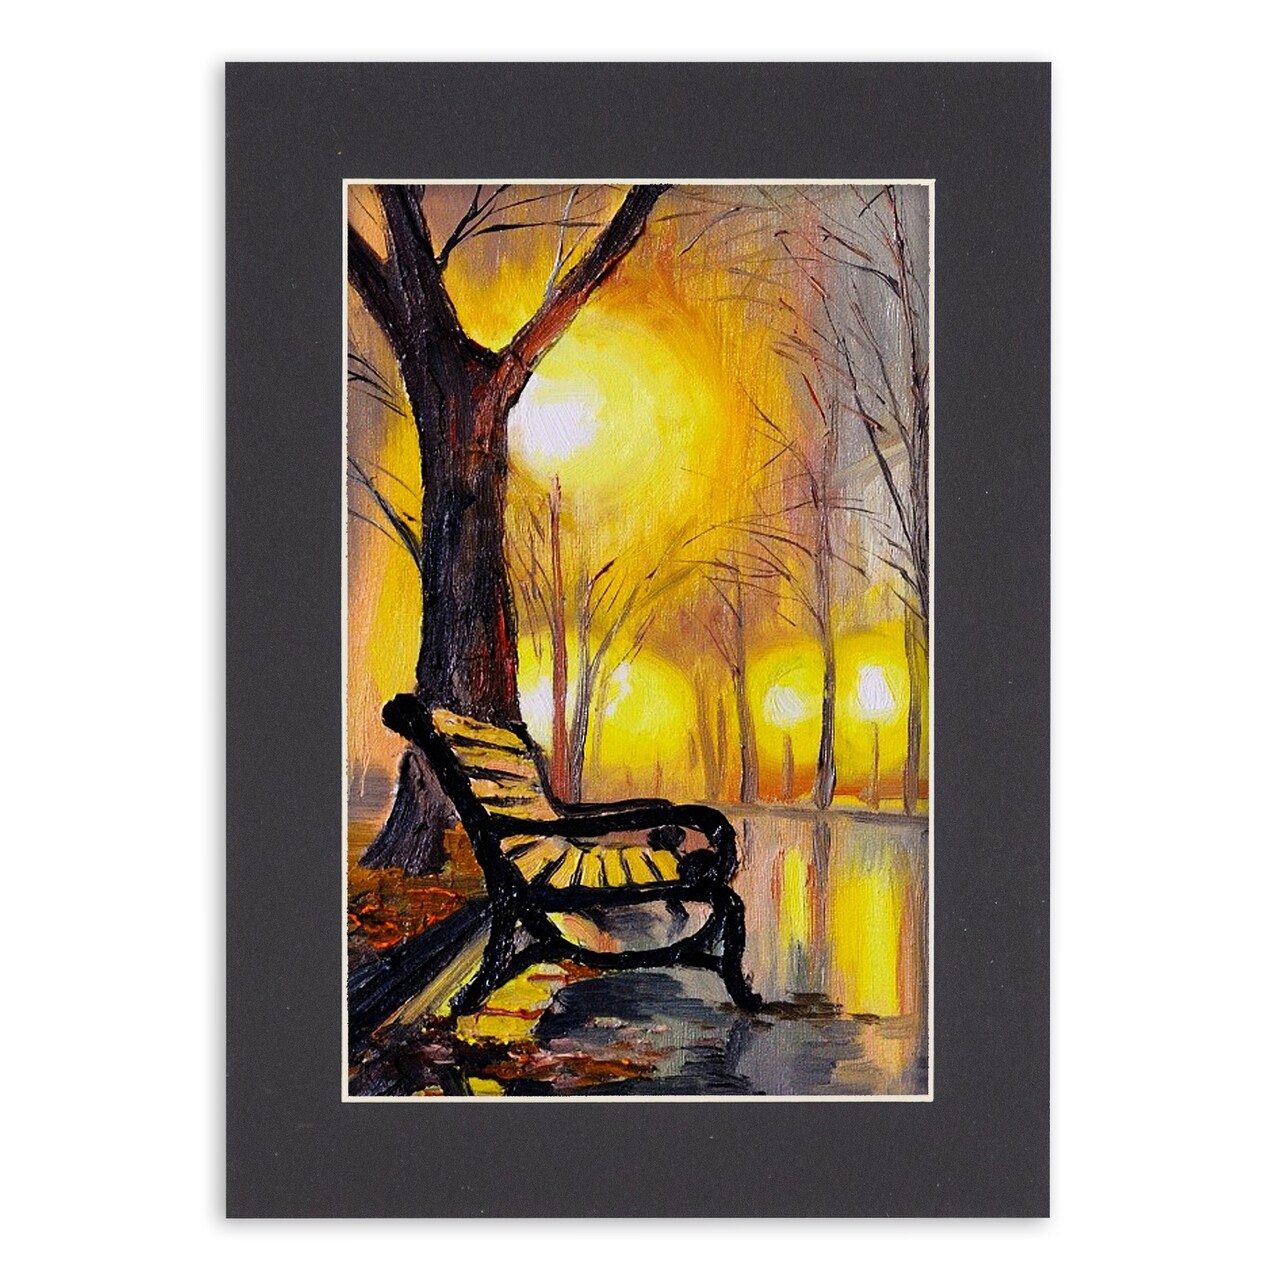 4x6 Mat for 5x7 Frame - Precut Mat Board Acid-Free Black 4x6 Photo Matte  Made to Fit a 5x7 Picture Frame - Bed Bath & Beyond - 38872291